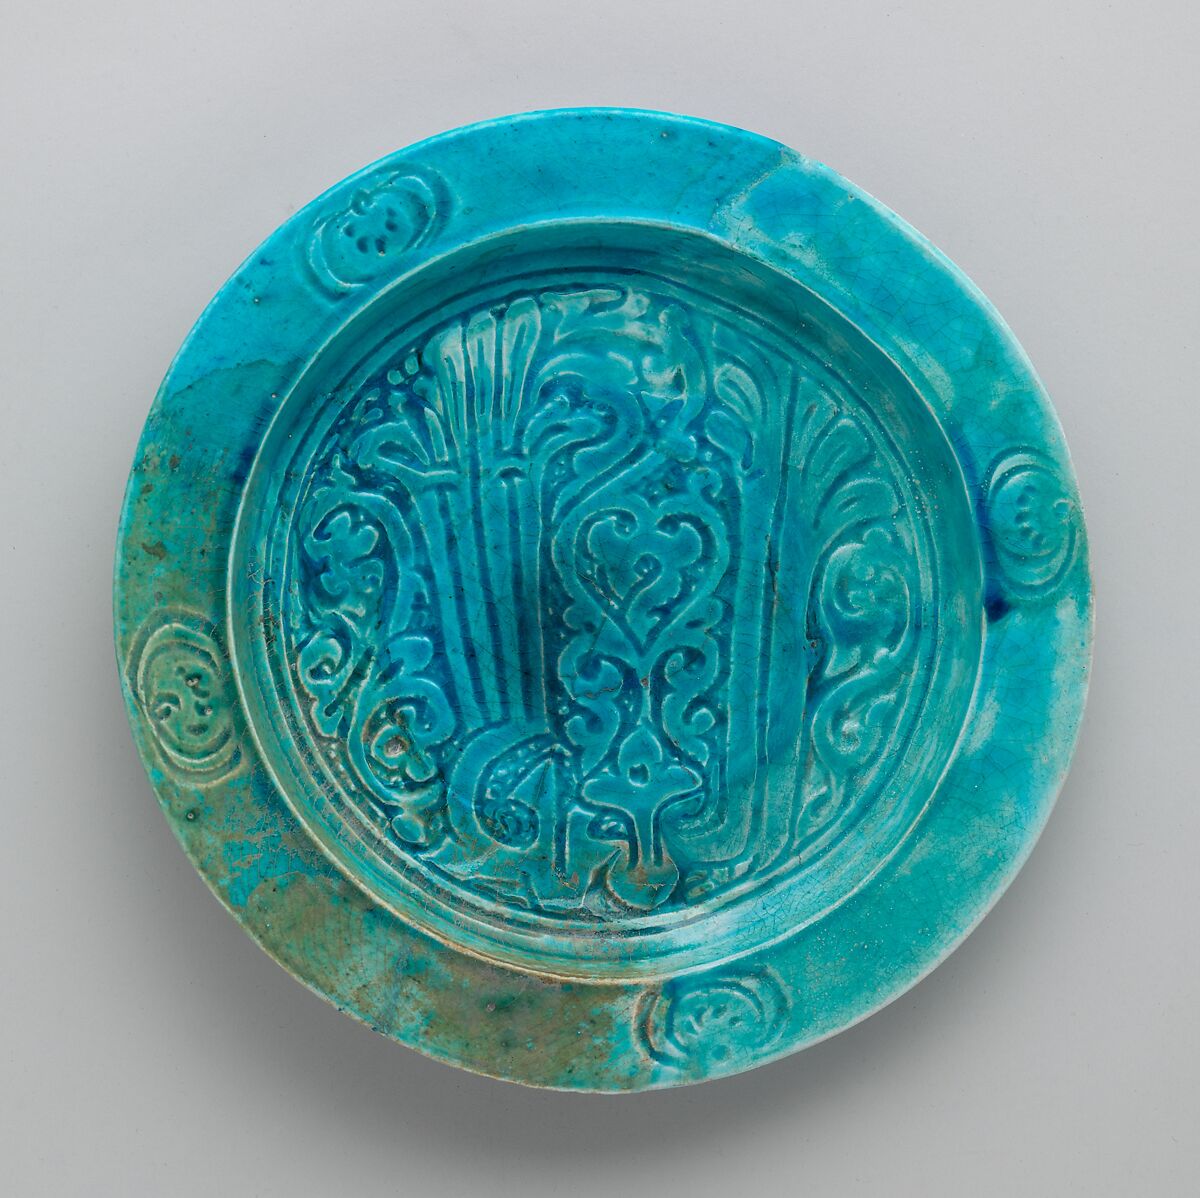 Dish with Carved Arabic Inscription in Floriated Kufic Reading "al-'izz" ("Glory"), Stonepaste; carved and glazed 